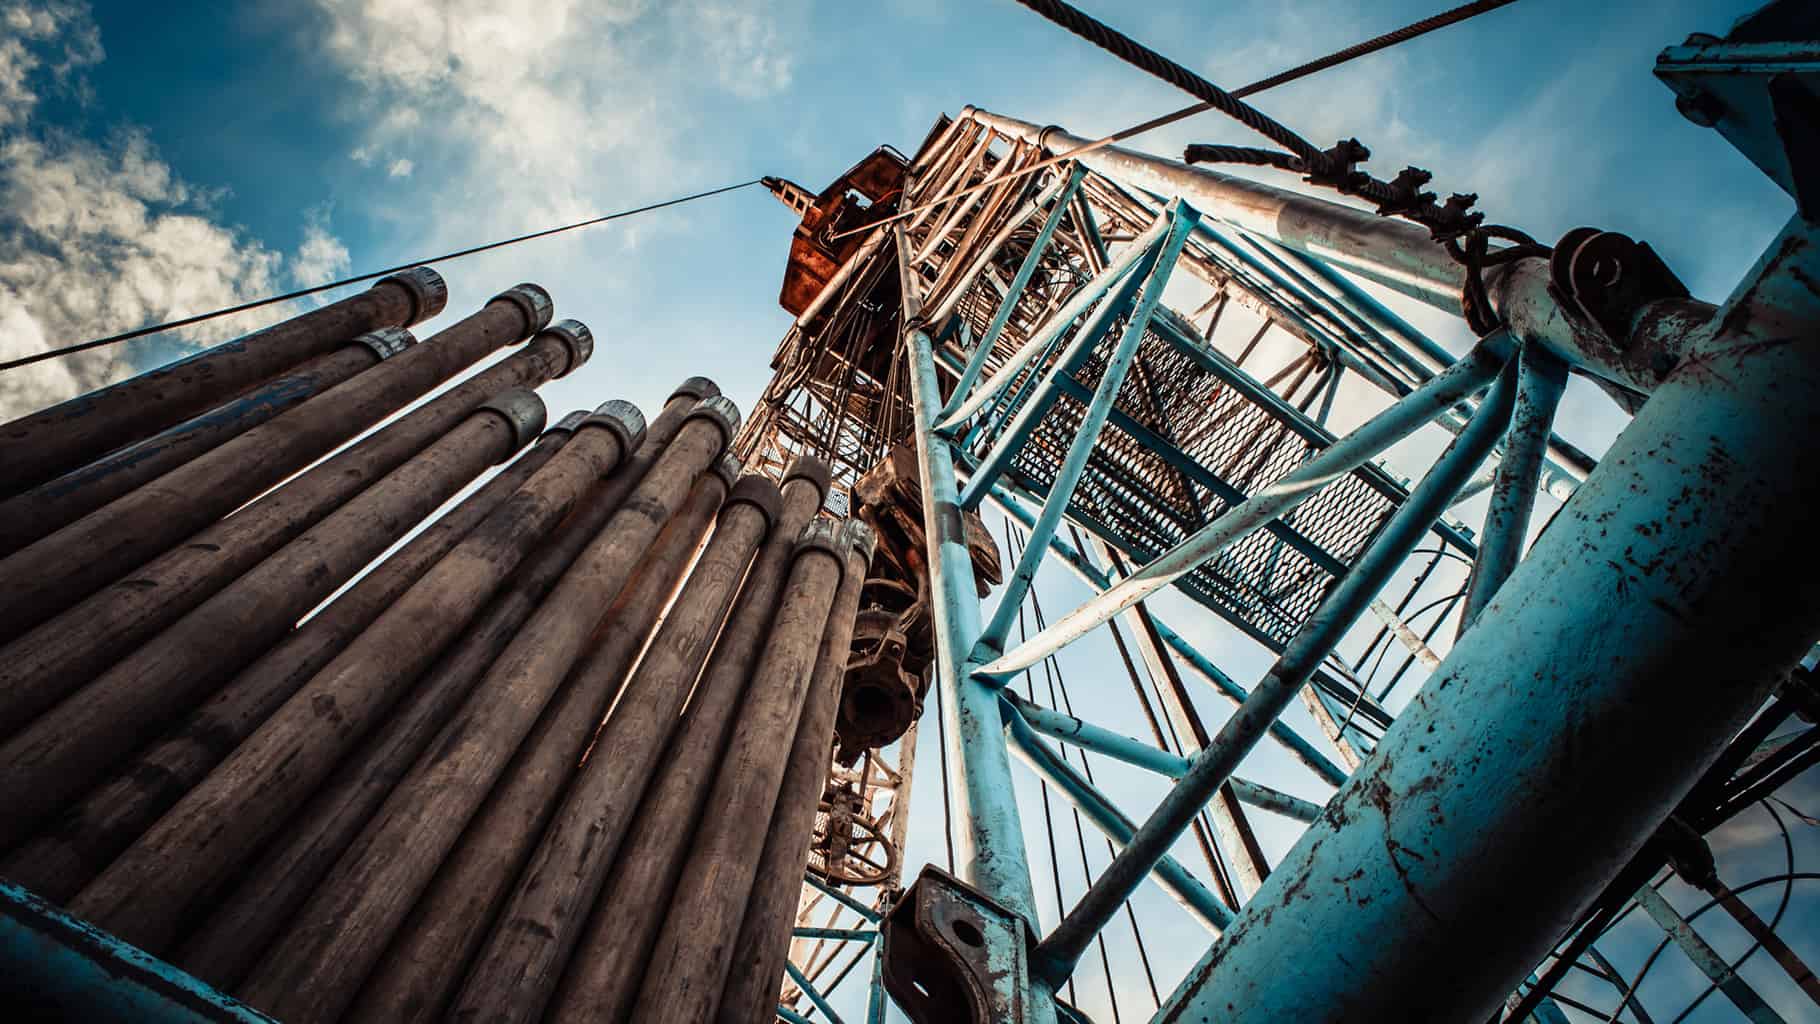 Shale gas production might have dark days ahead (Photo: Shutterstock)